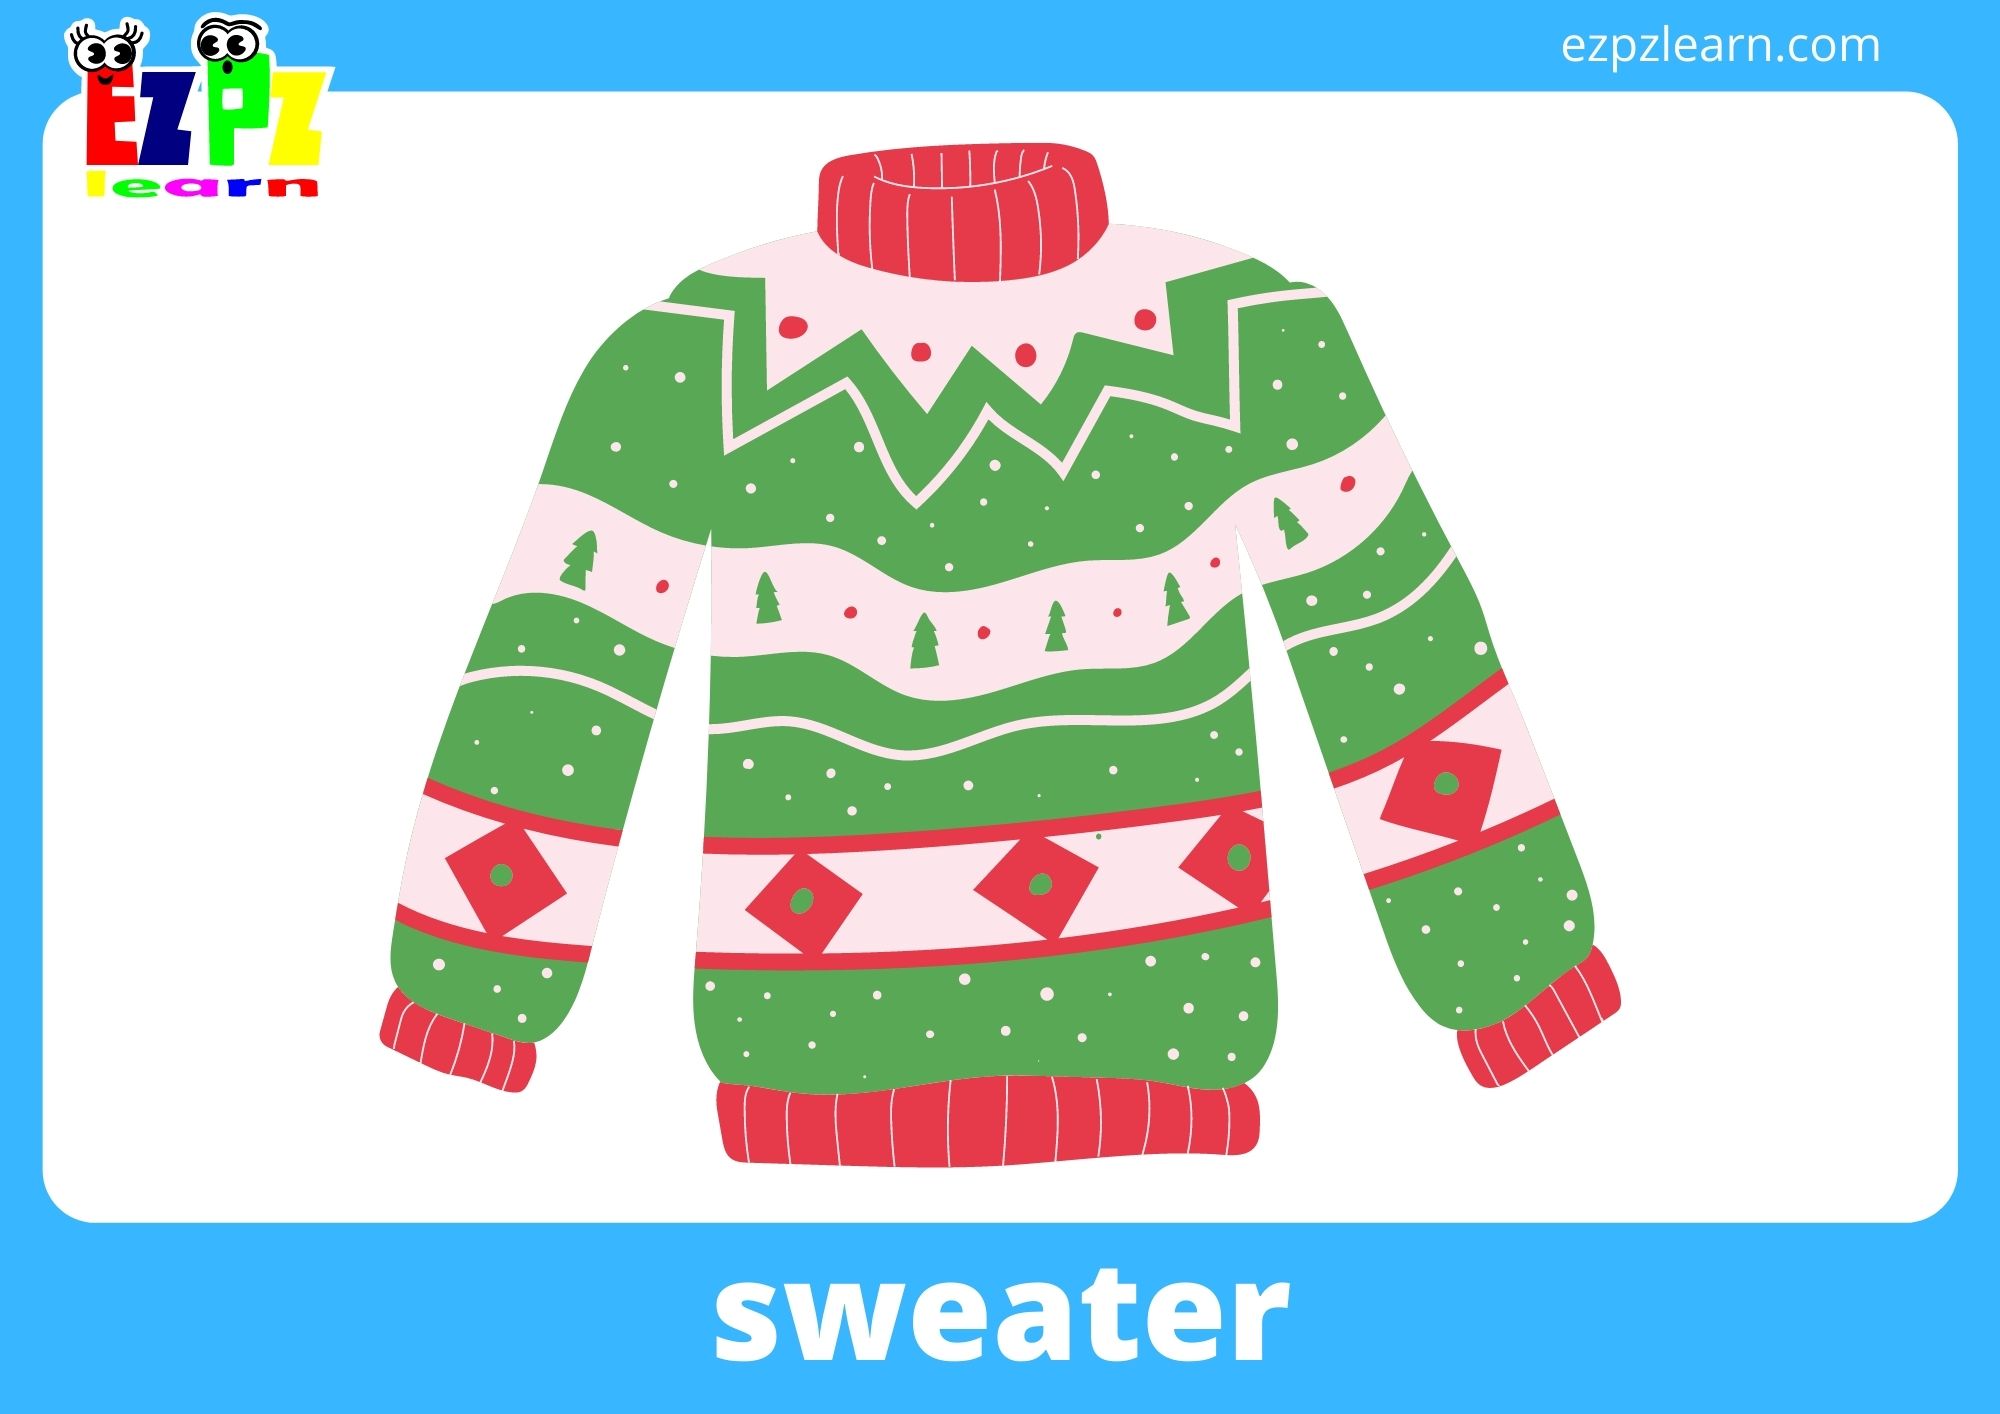 Winter Clothes With Words - Ezpzlearn.com